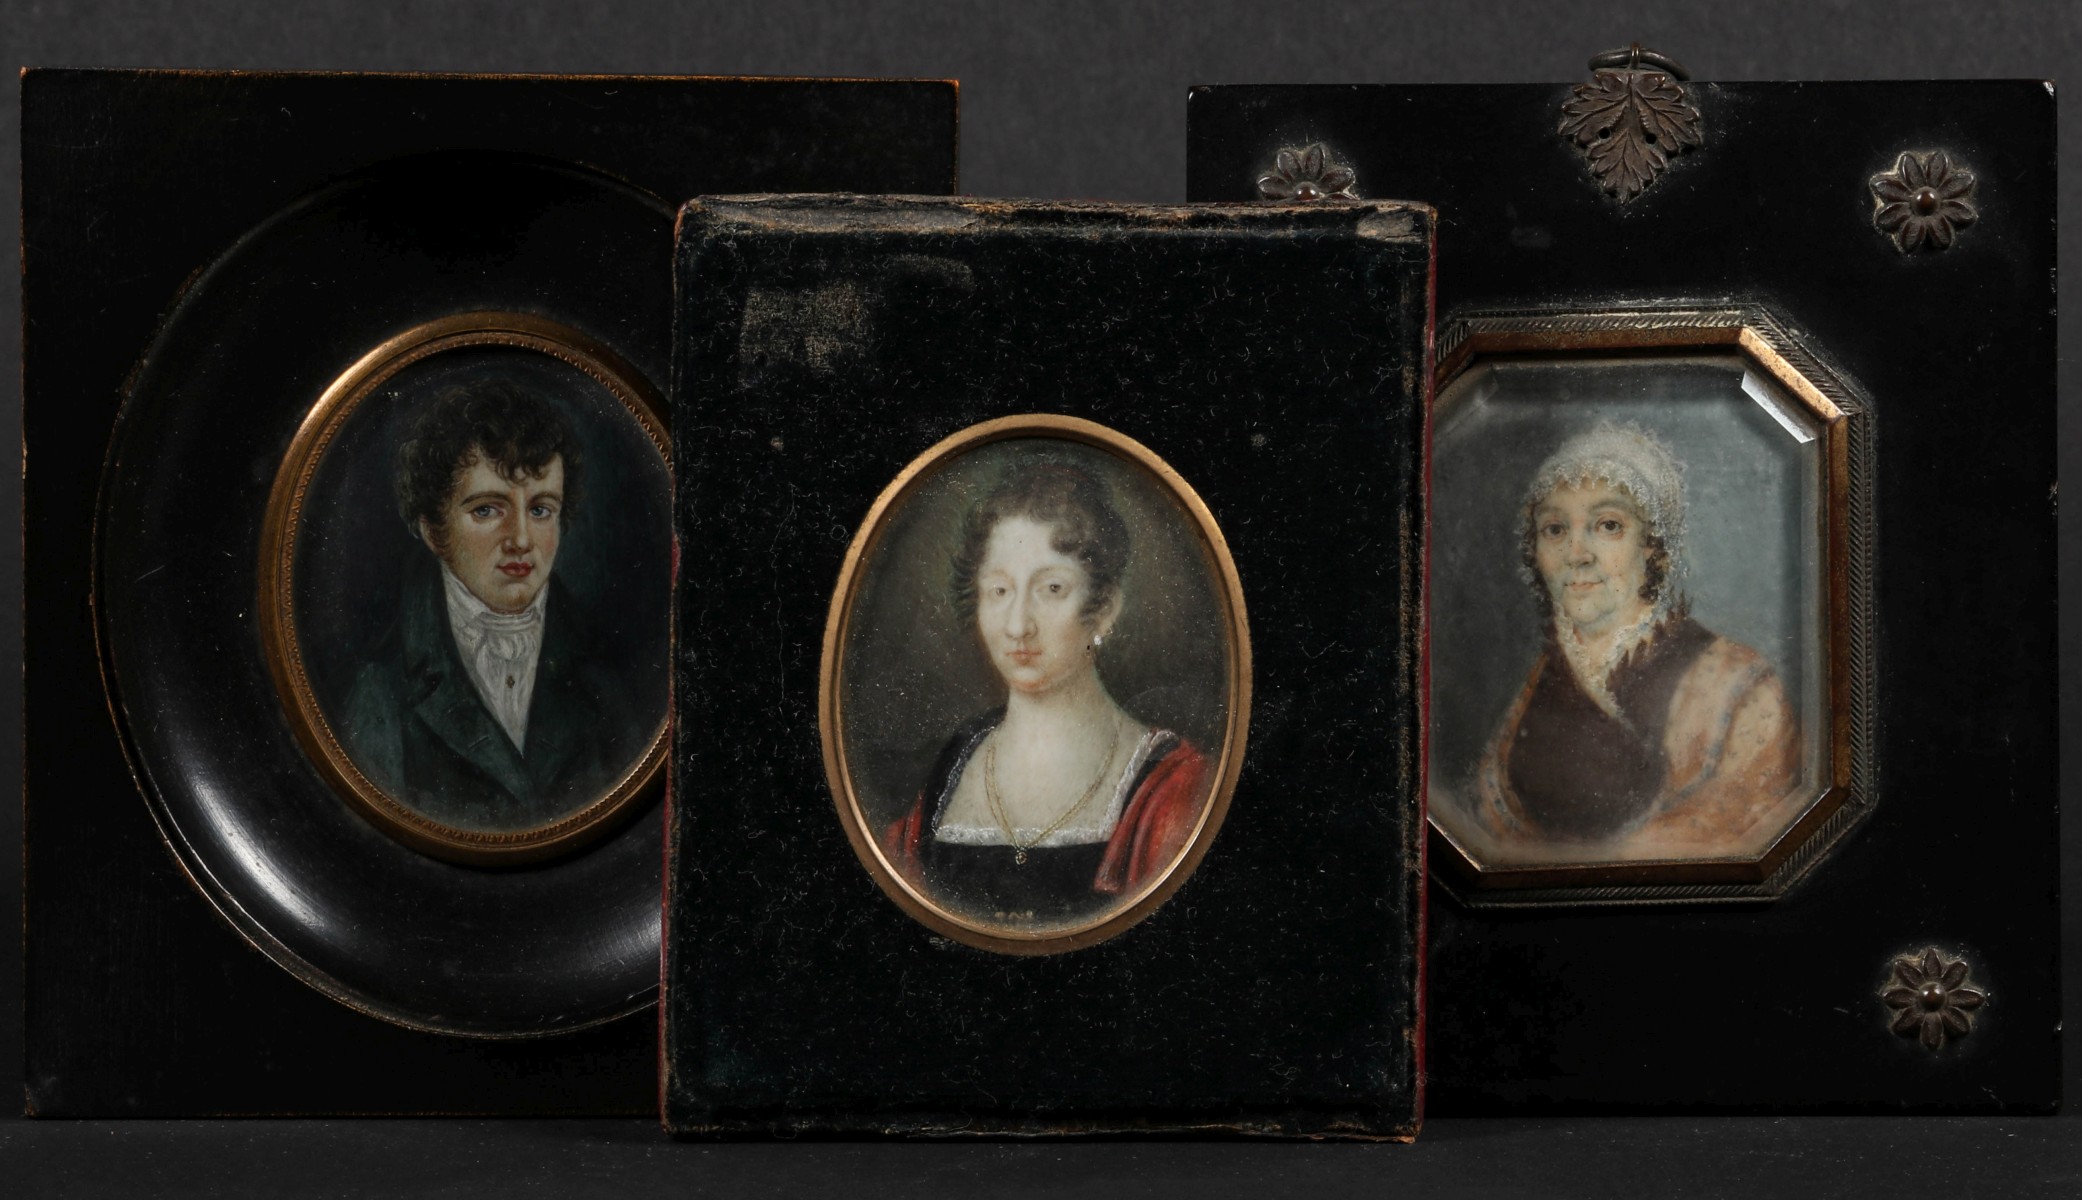 THREE LATE 18TH TO EARLY 19TH C. MINIATURE PORTRAITS